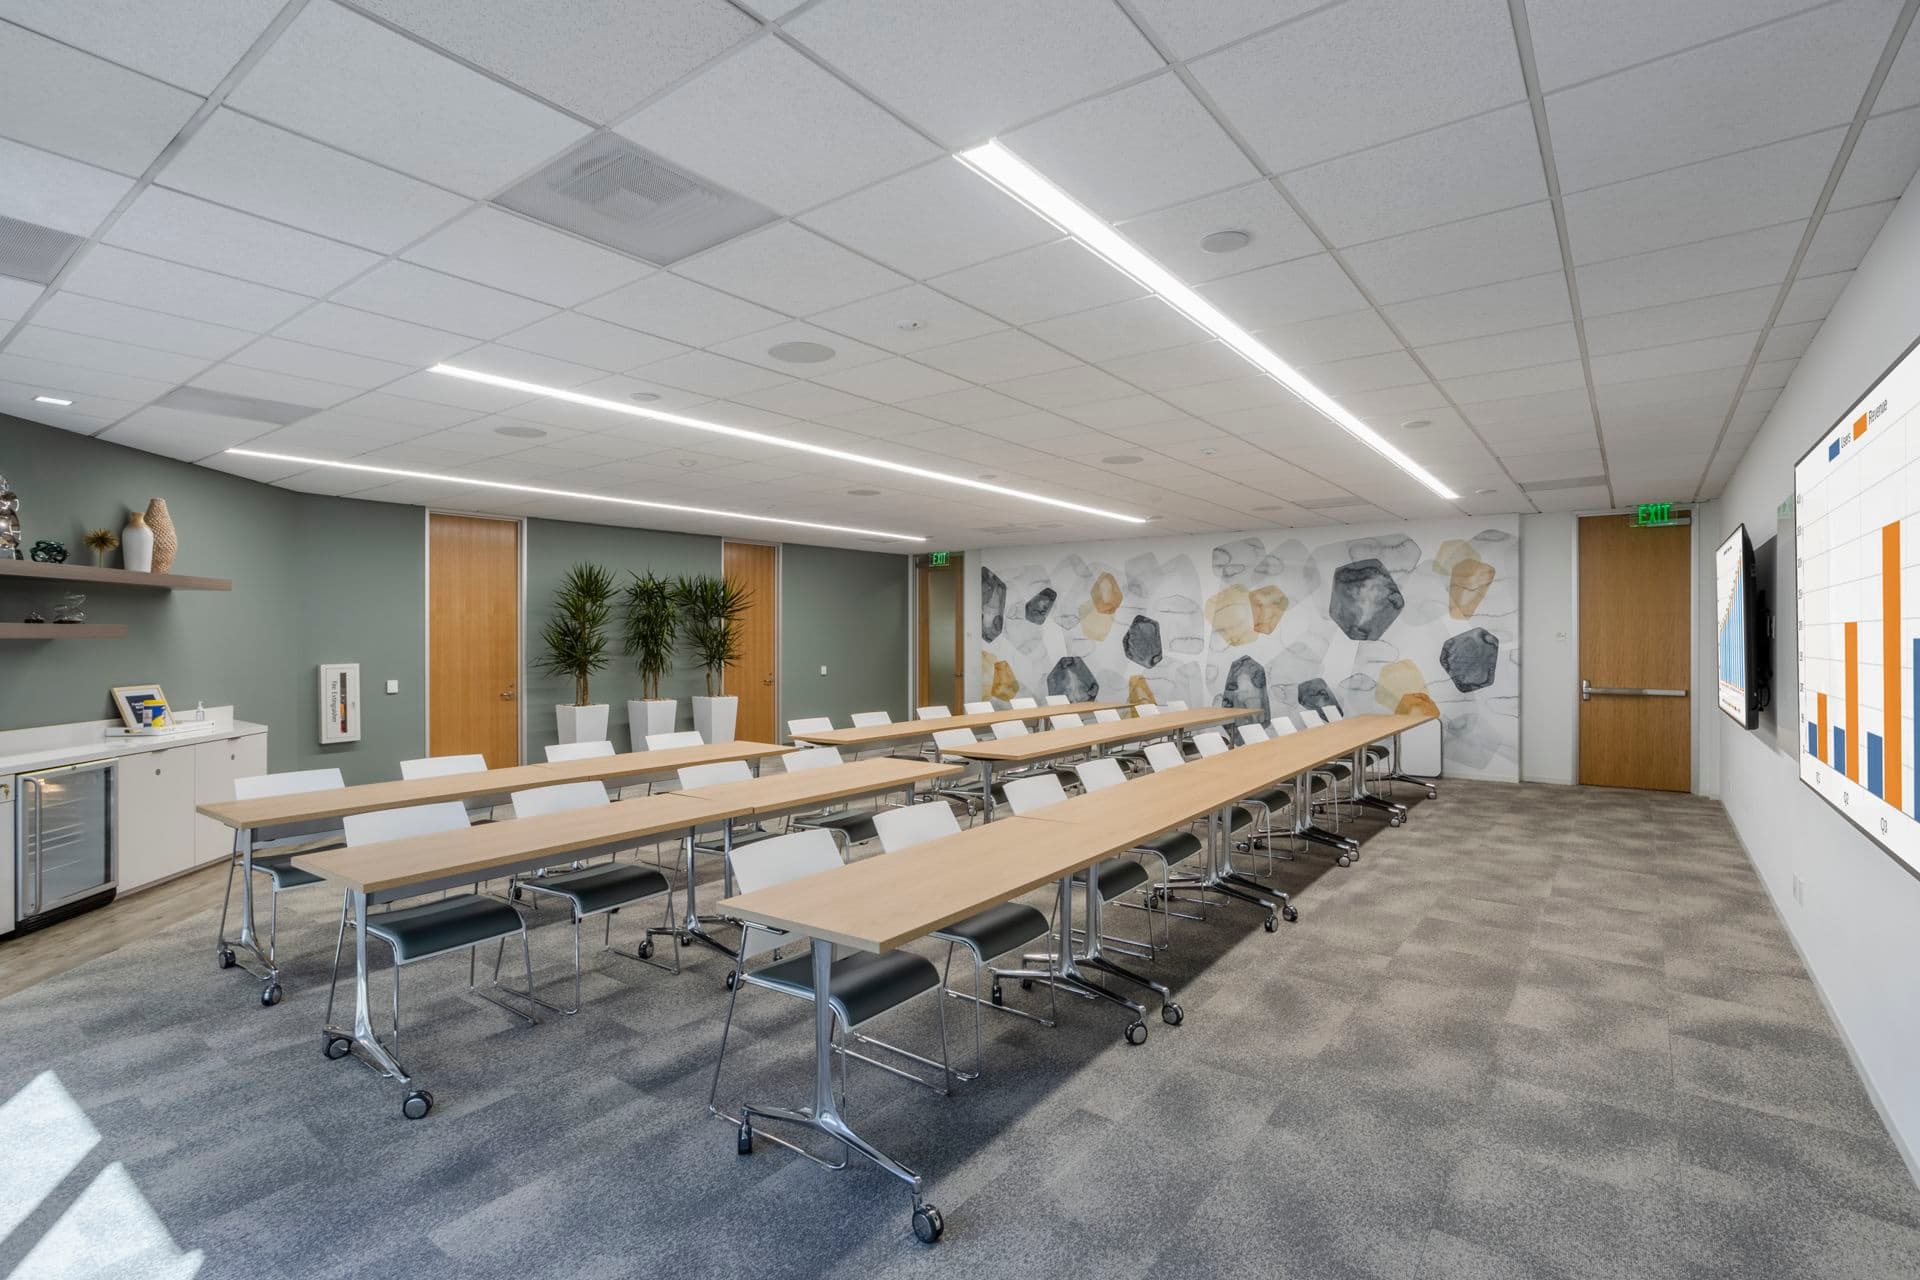 Interior view of the Conference Room at 36 Executive  in  Irvine, CA.